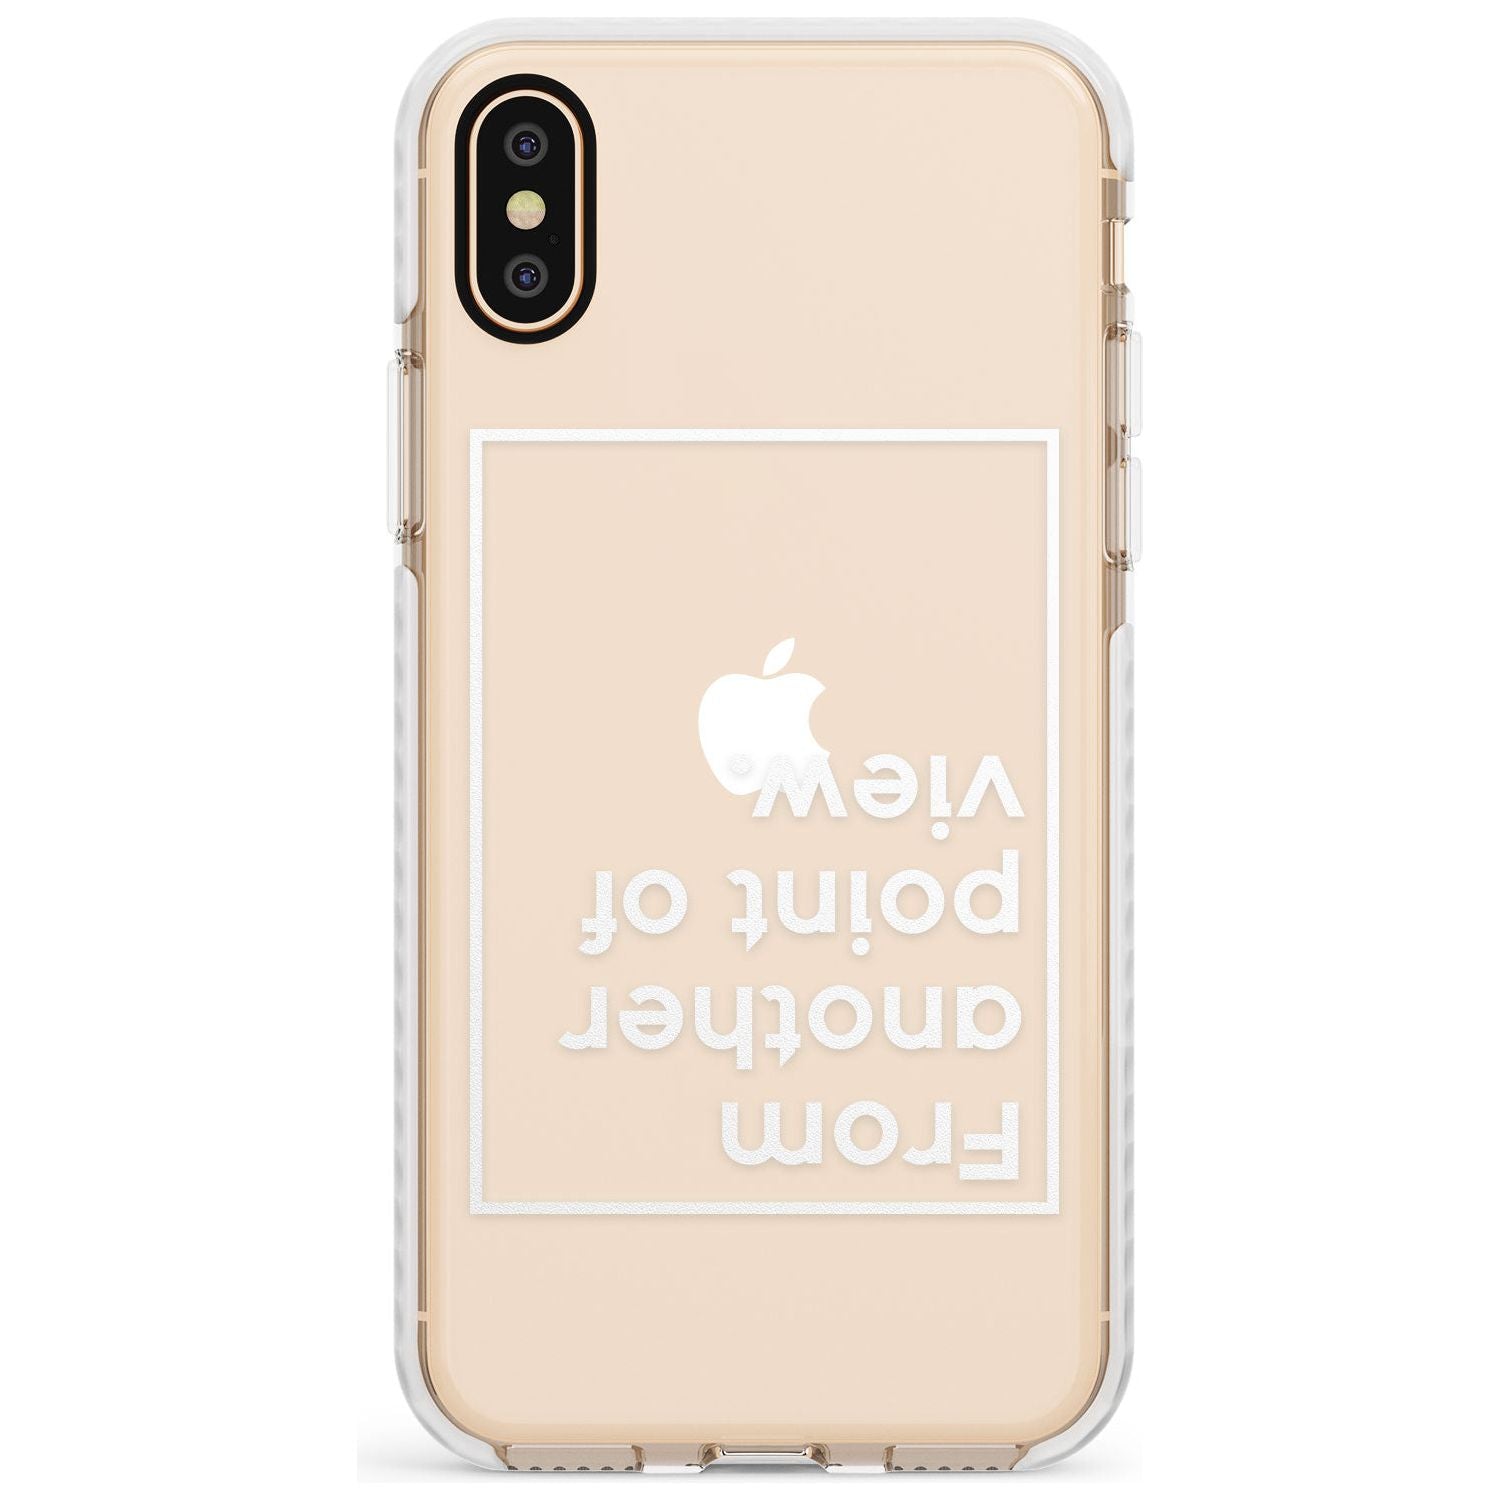 Another Point of View (White) Slim TPU Phone Case Warehouse X XS Max XR